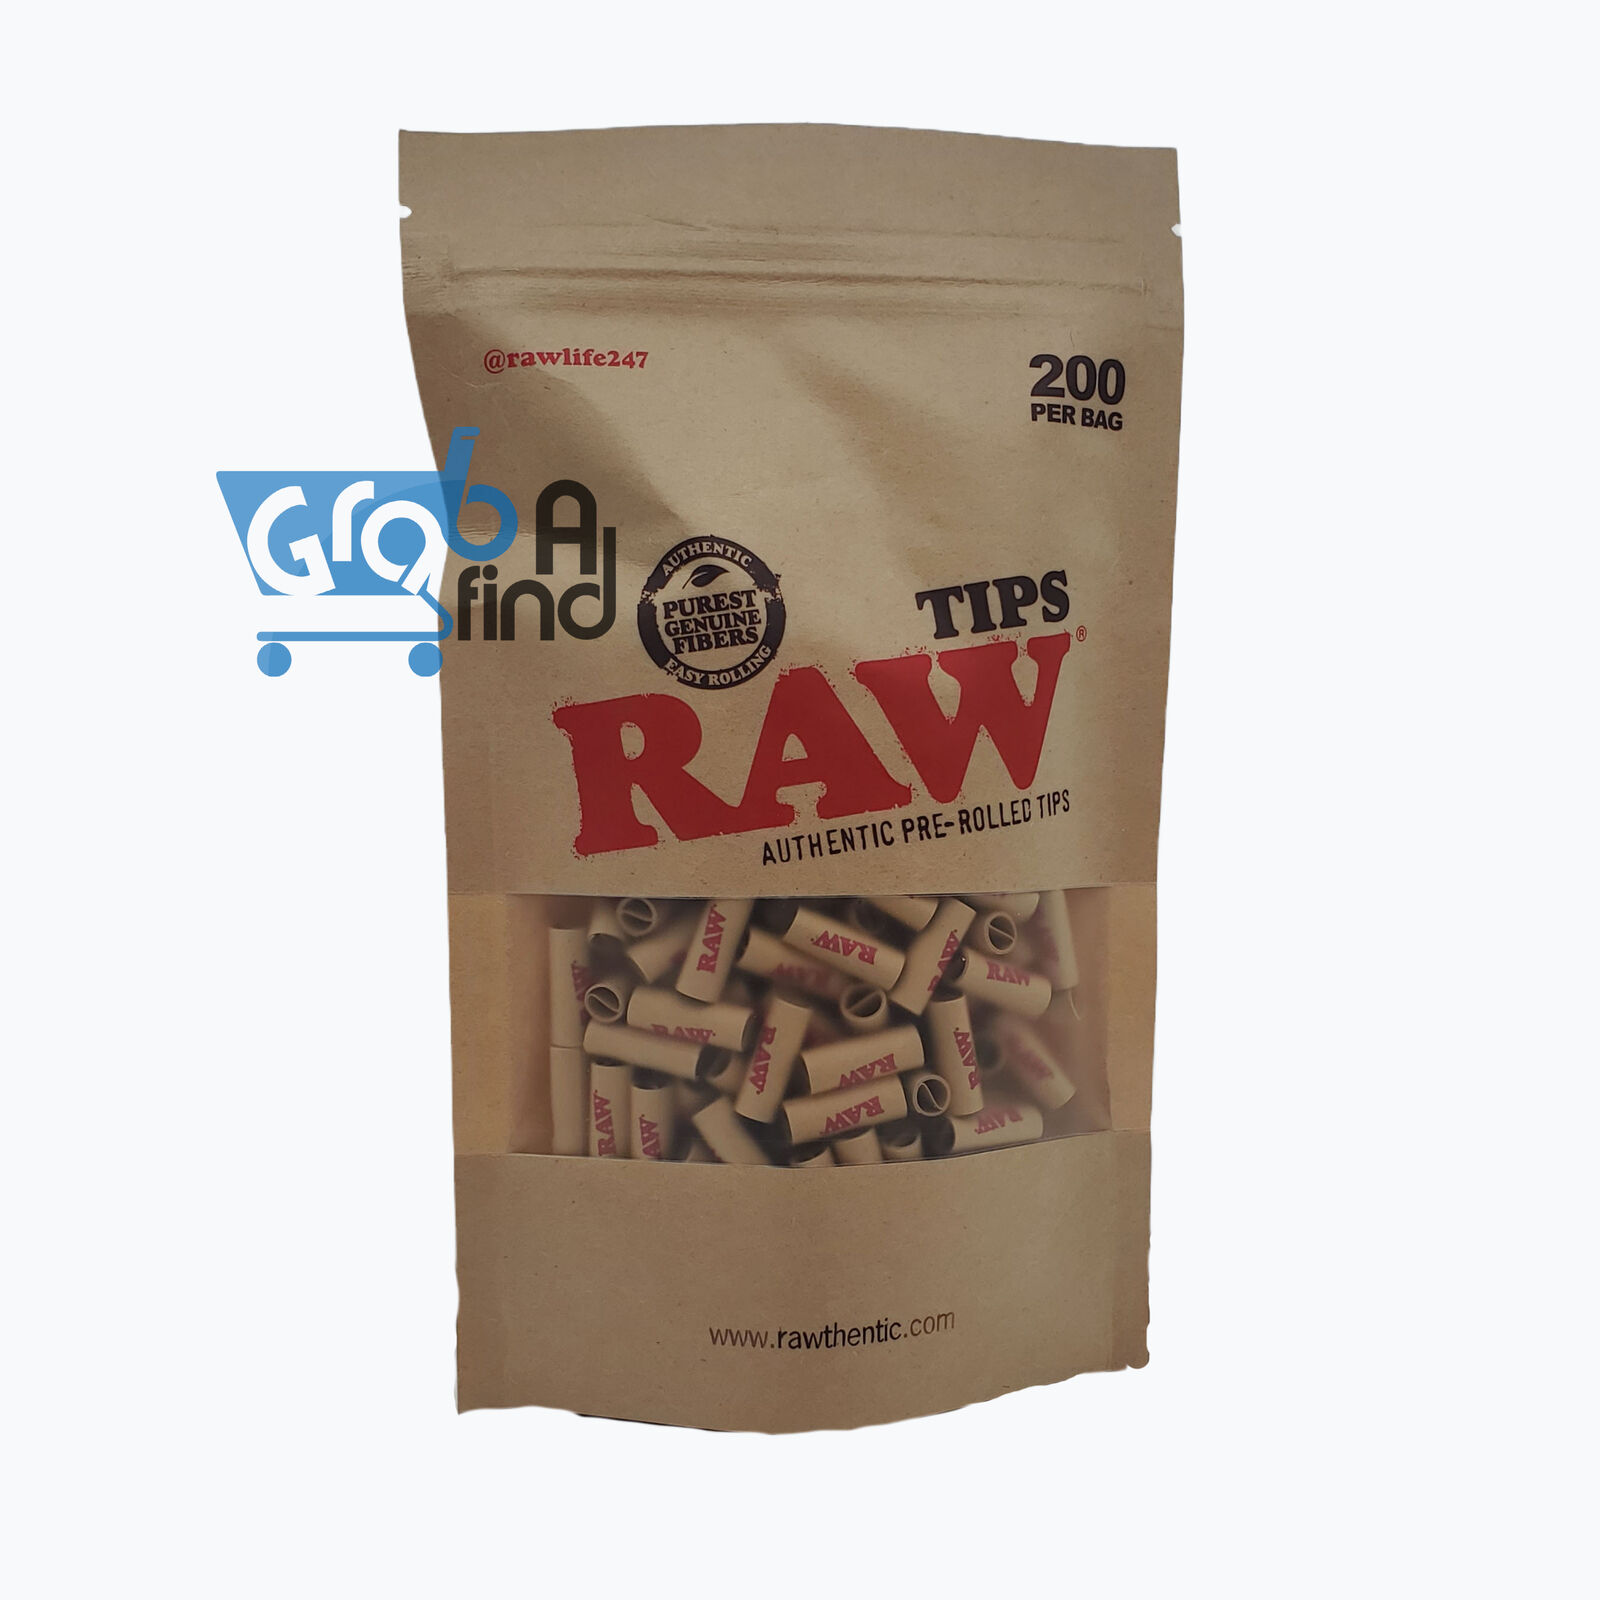 RAW Natural Unrefined Pre-Rolled Filter Tips - 1 Bag of 200 Tips